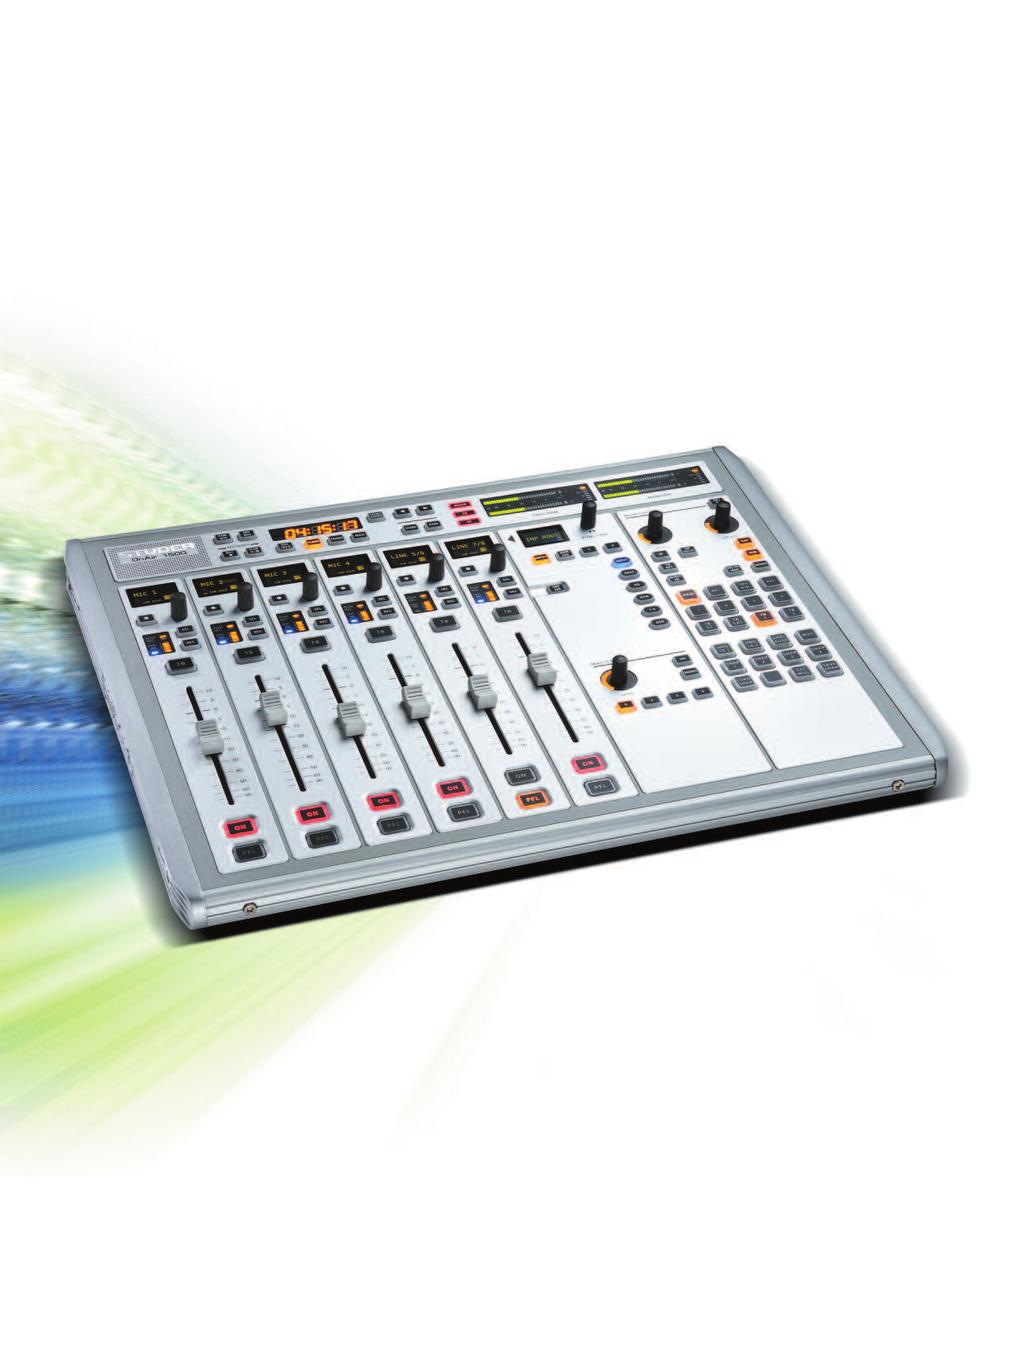 A lot more broadcasting For a lot less money The OnAir 1500 has been designed as a flexible console for on-air broadcasting and is also suitable for production work.